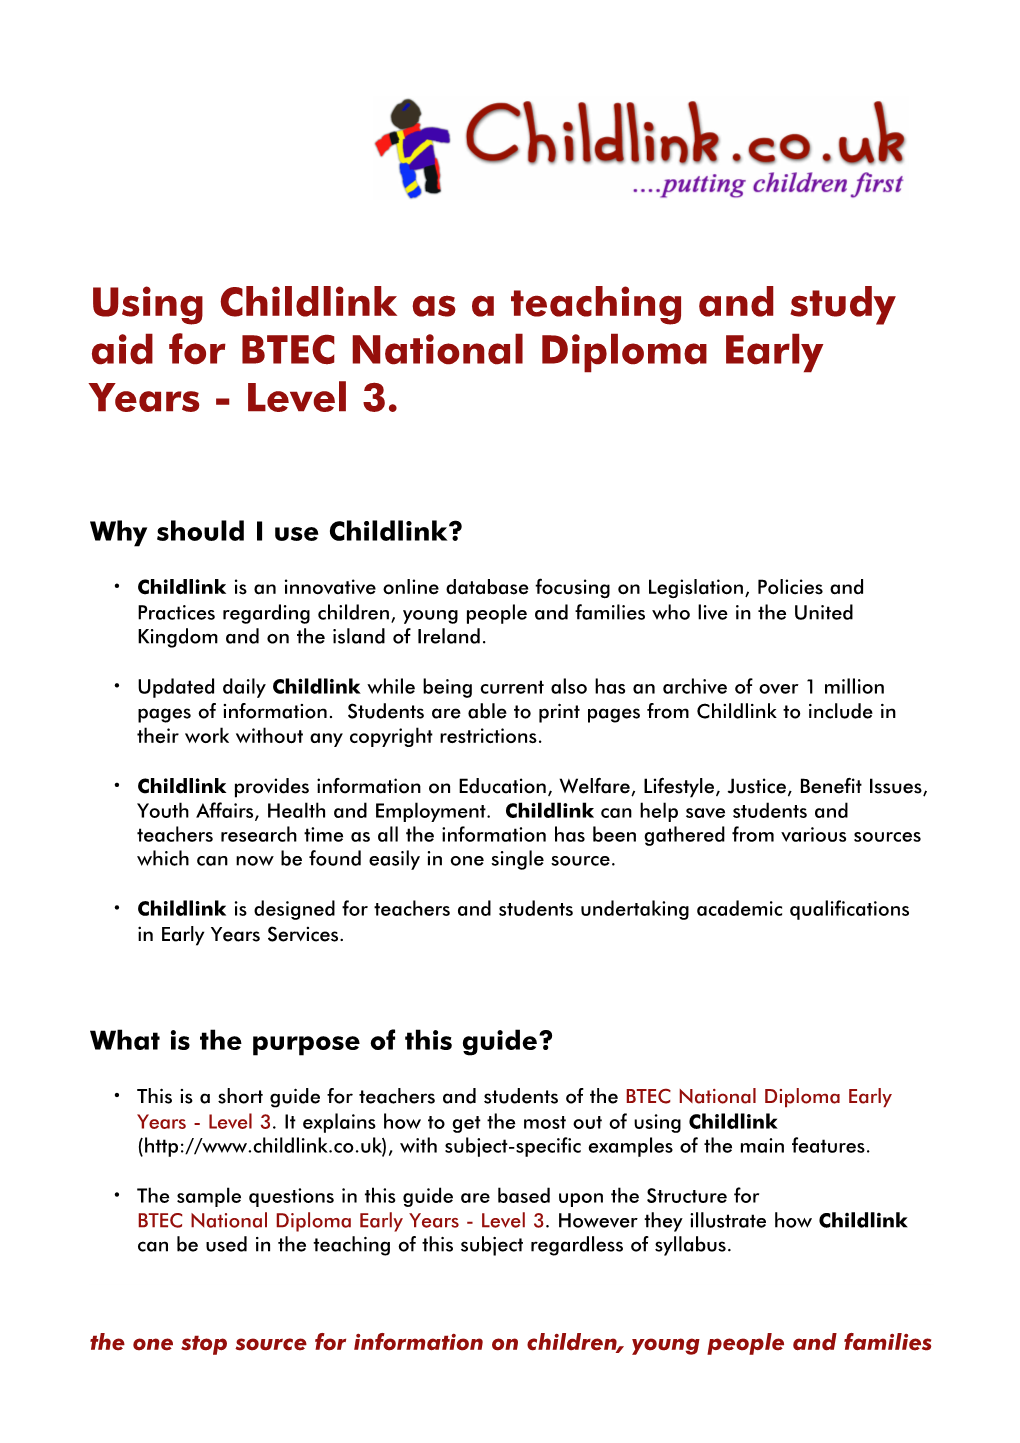 BTEC National Diploma Early Years Level 3